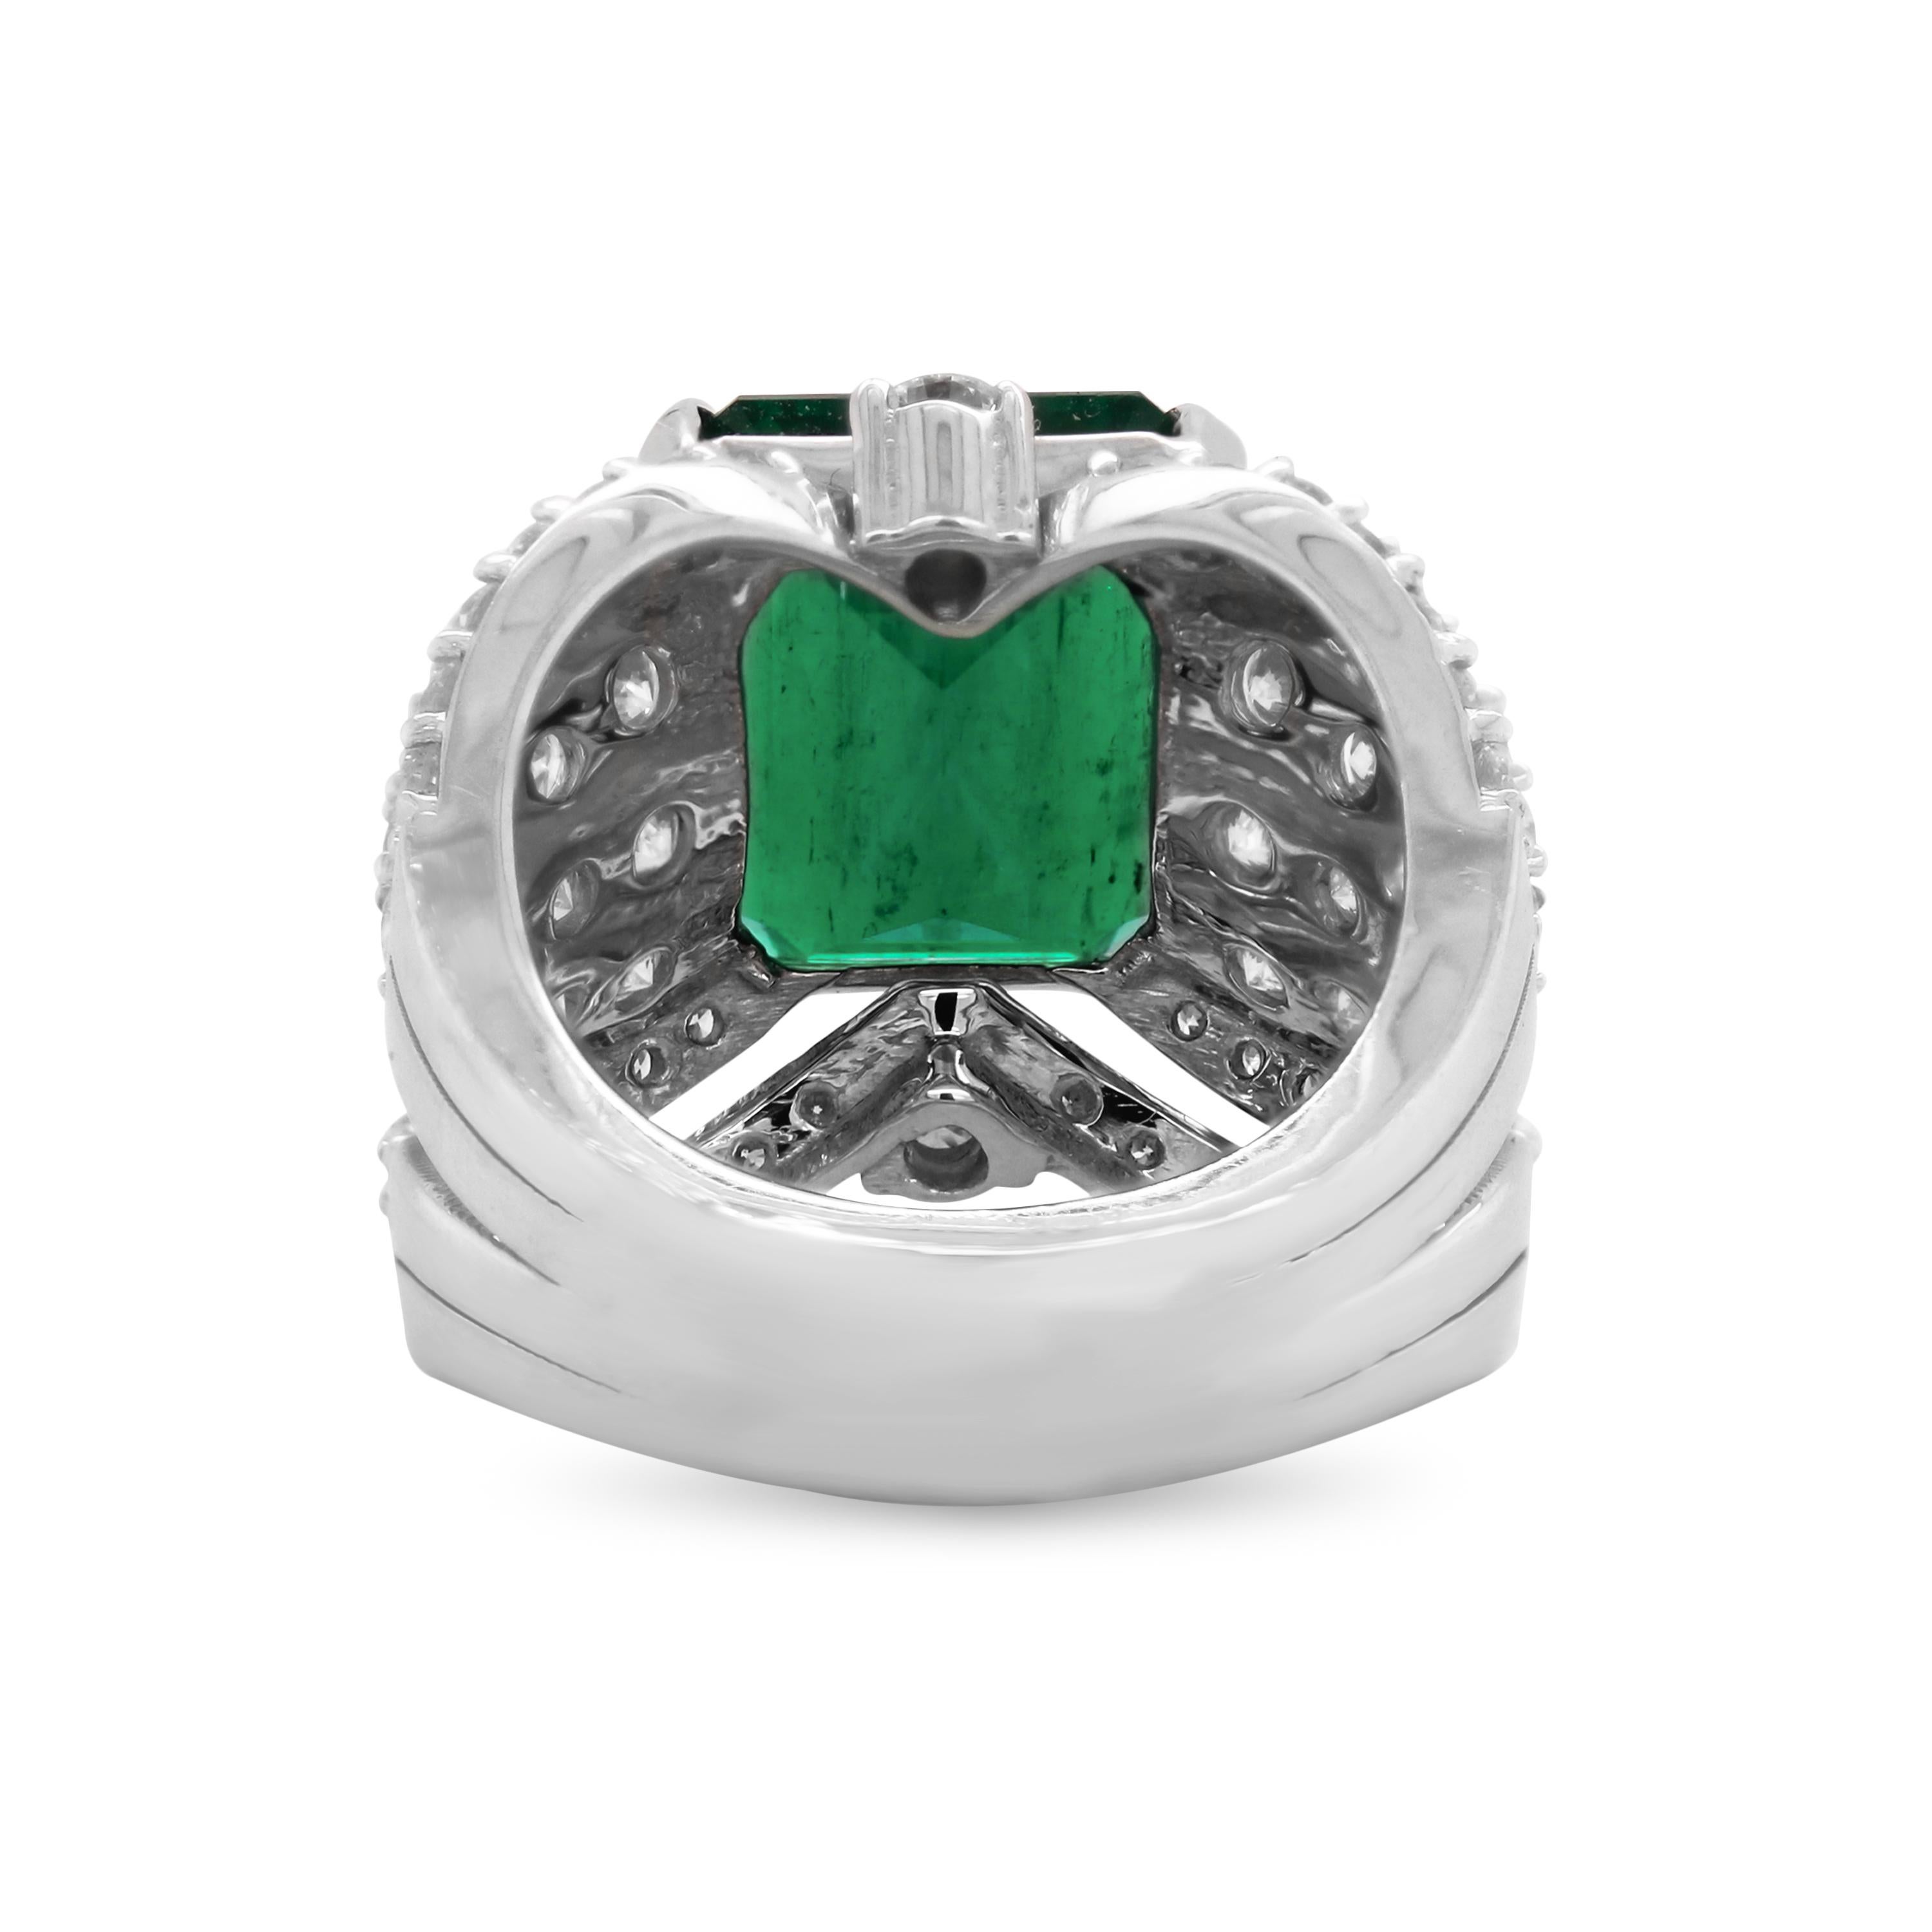 Contemporary GIA Certified 7.25 Carat Colombian Emerald 18k White Gold Diamond Cocktail Ring For Sale